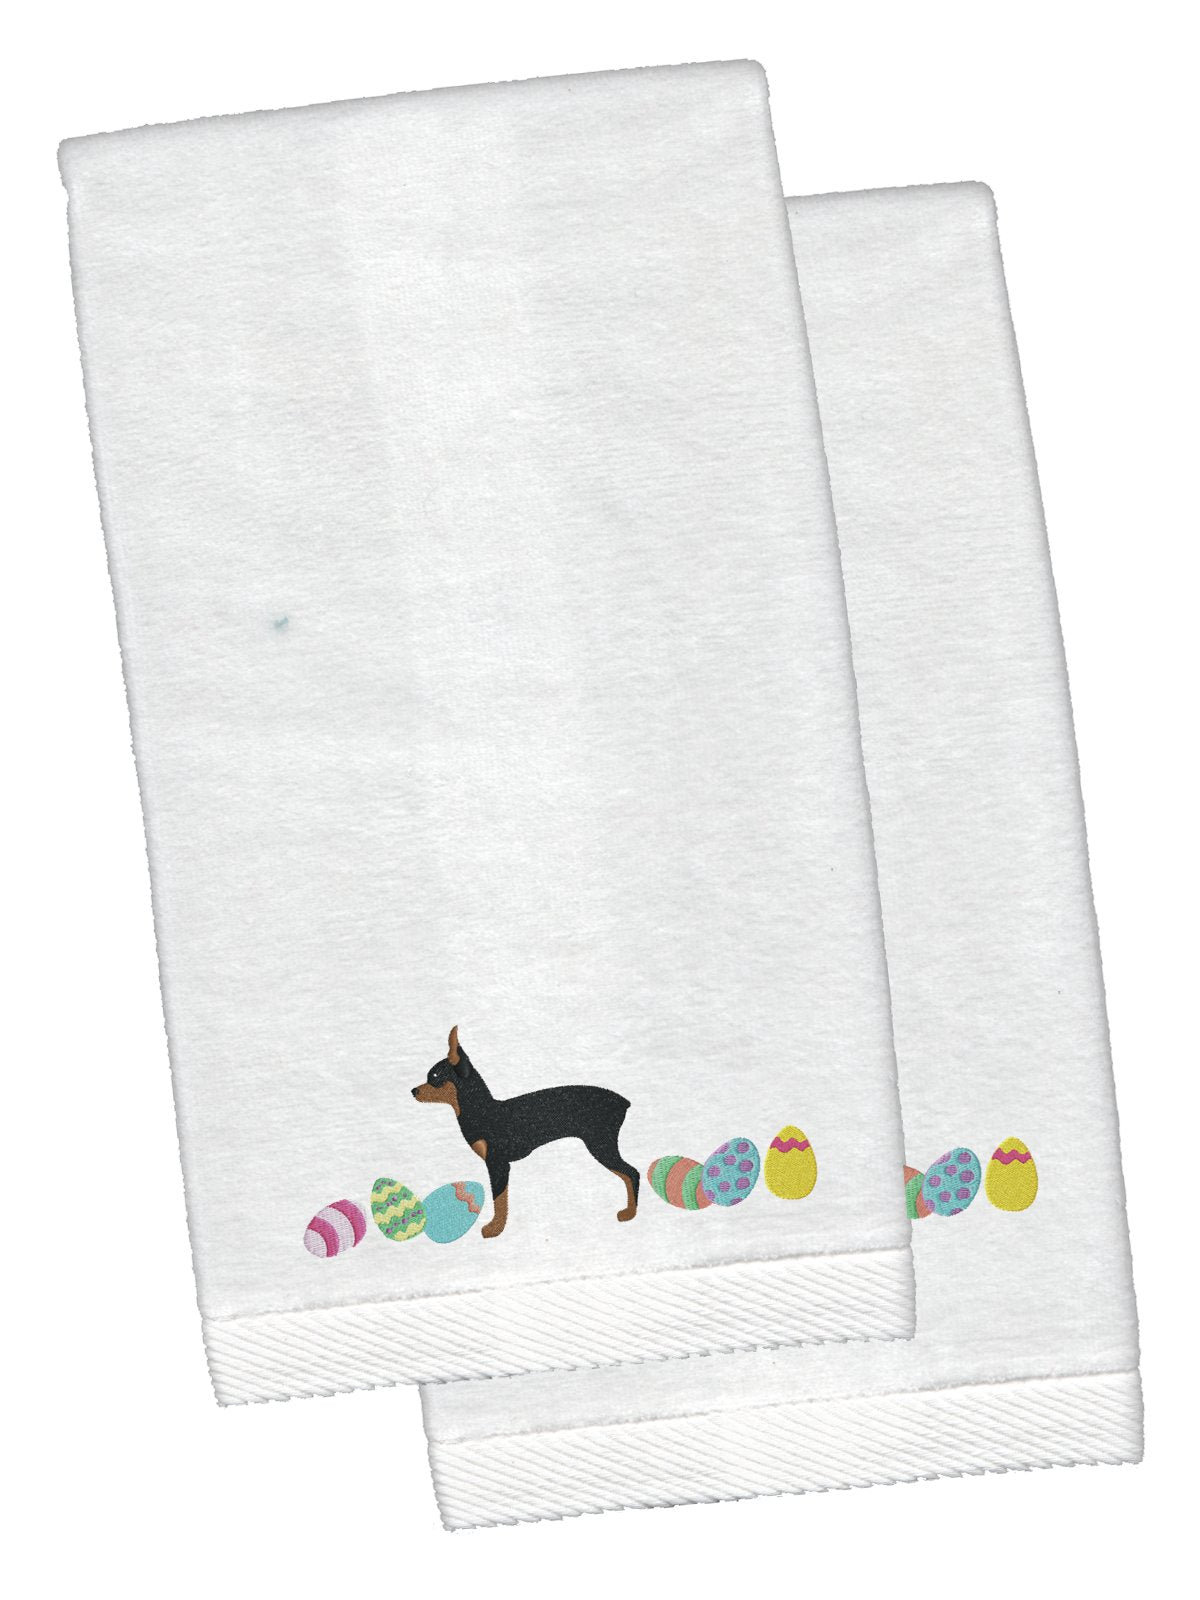 Toy Fox Terrier Easter White Embroidered Plush Hand Towel Set of 2 CK1690KTEMB by Caroline's Treasures